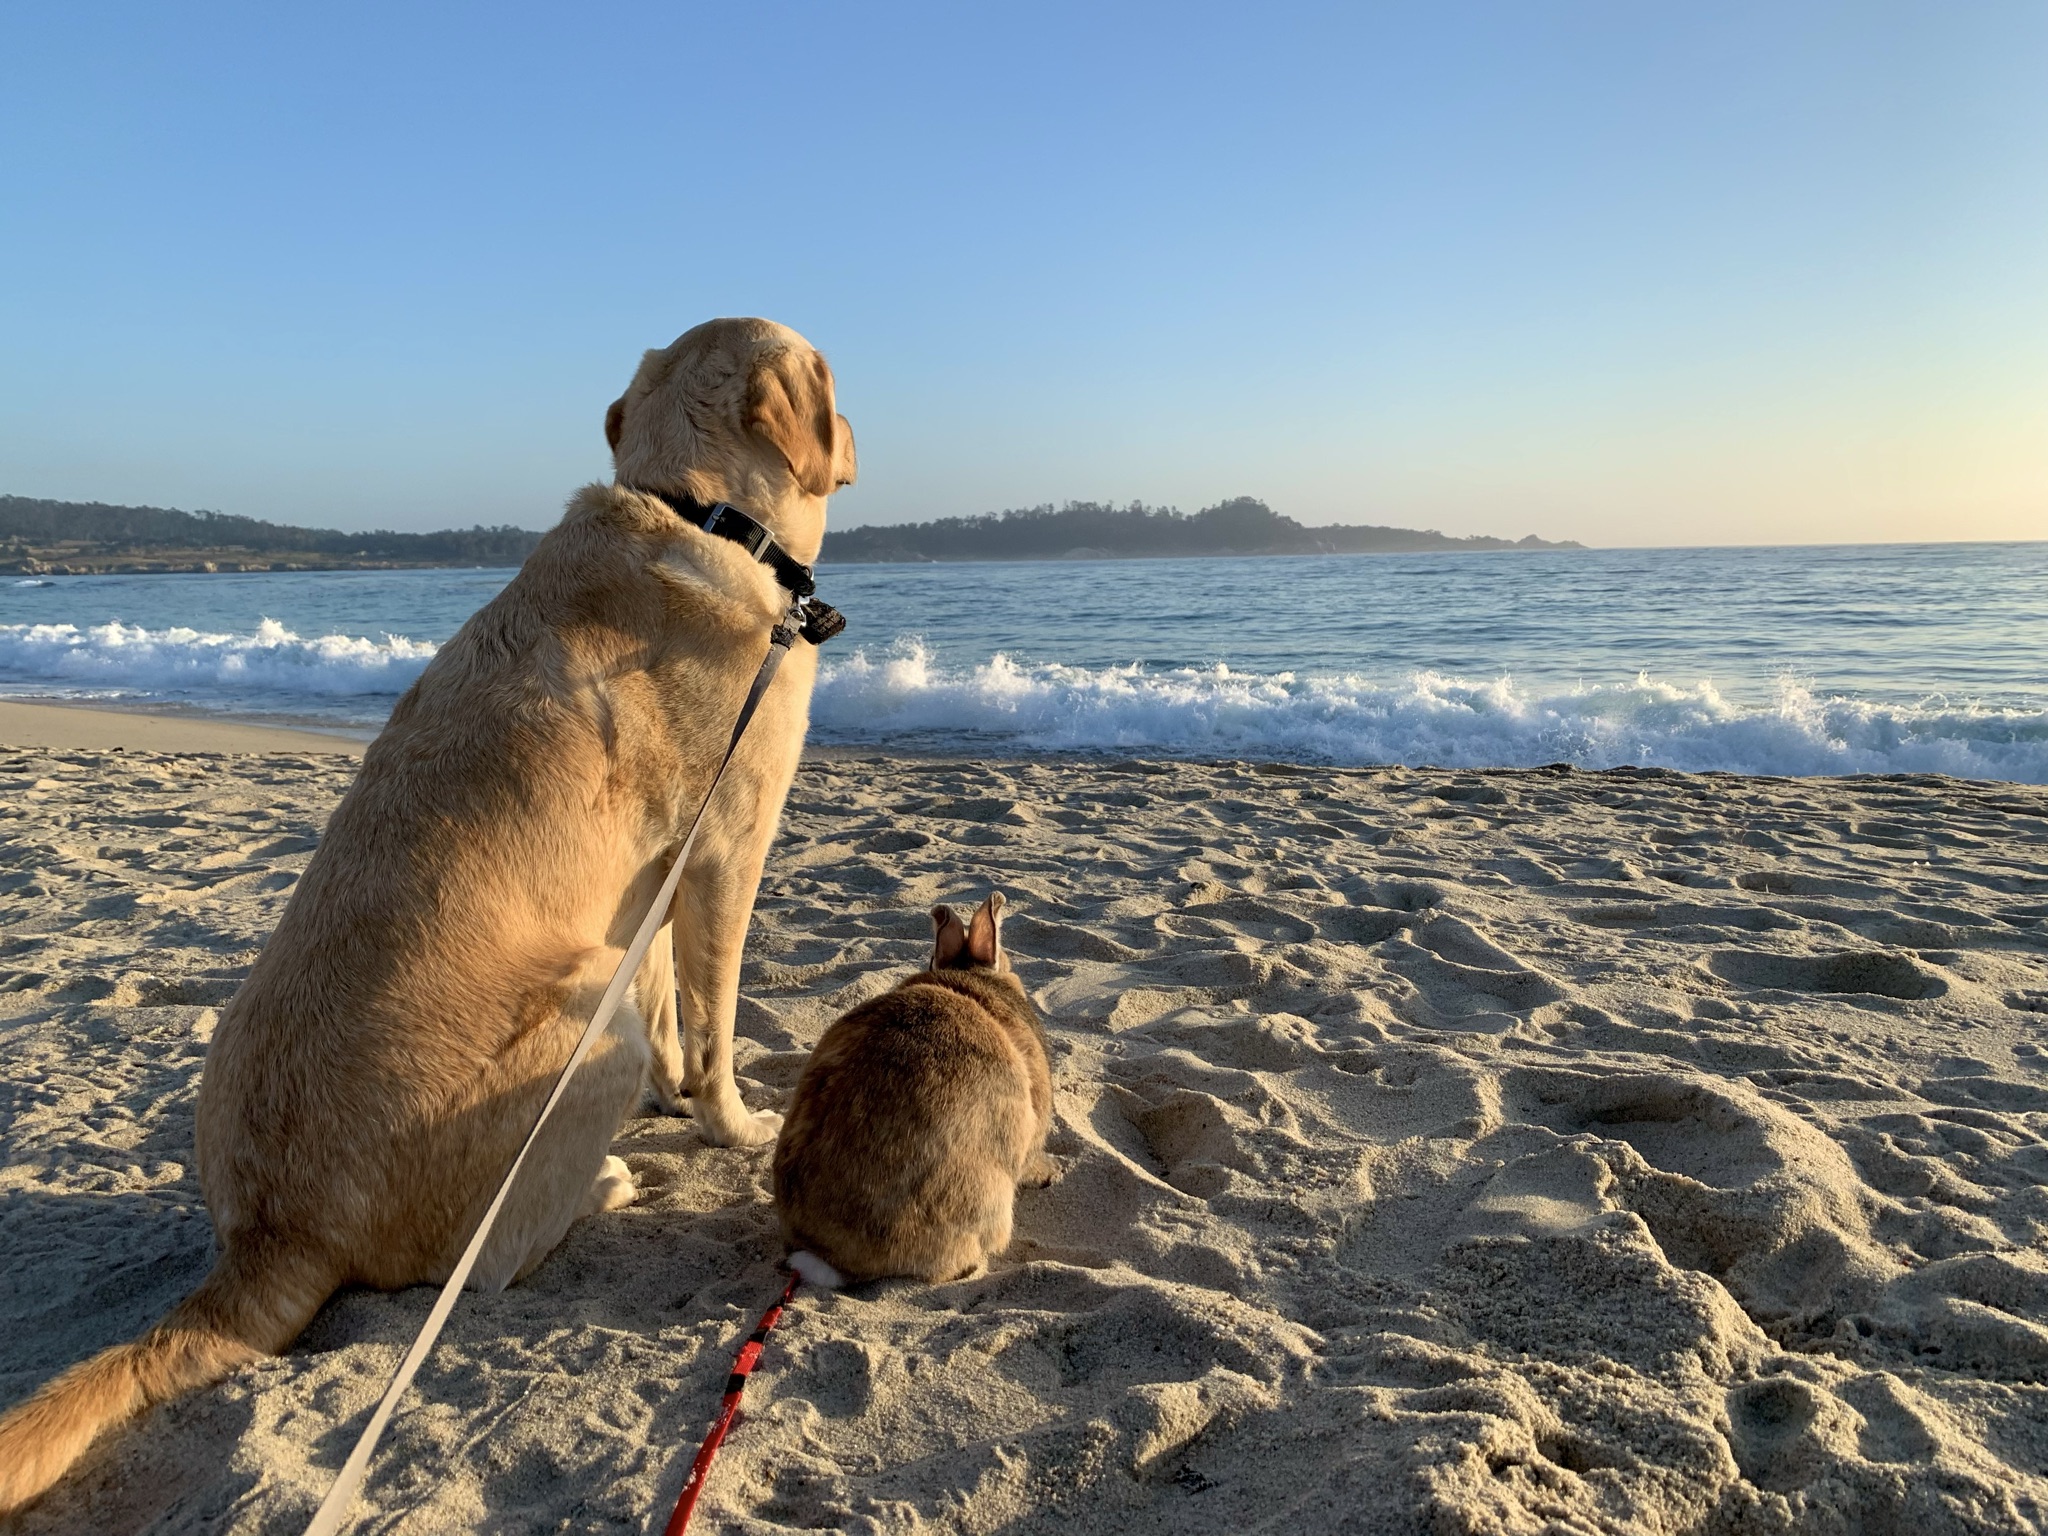 Yellow Lab, Laredo, sits next to harlequin rabbit, Binky, on a sandy beach facing away towards the ocean and sunset sky. A small blue wave is crashing behind them.